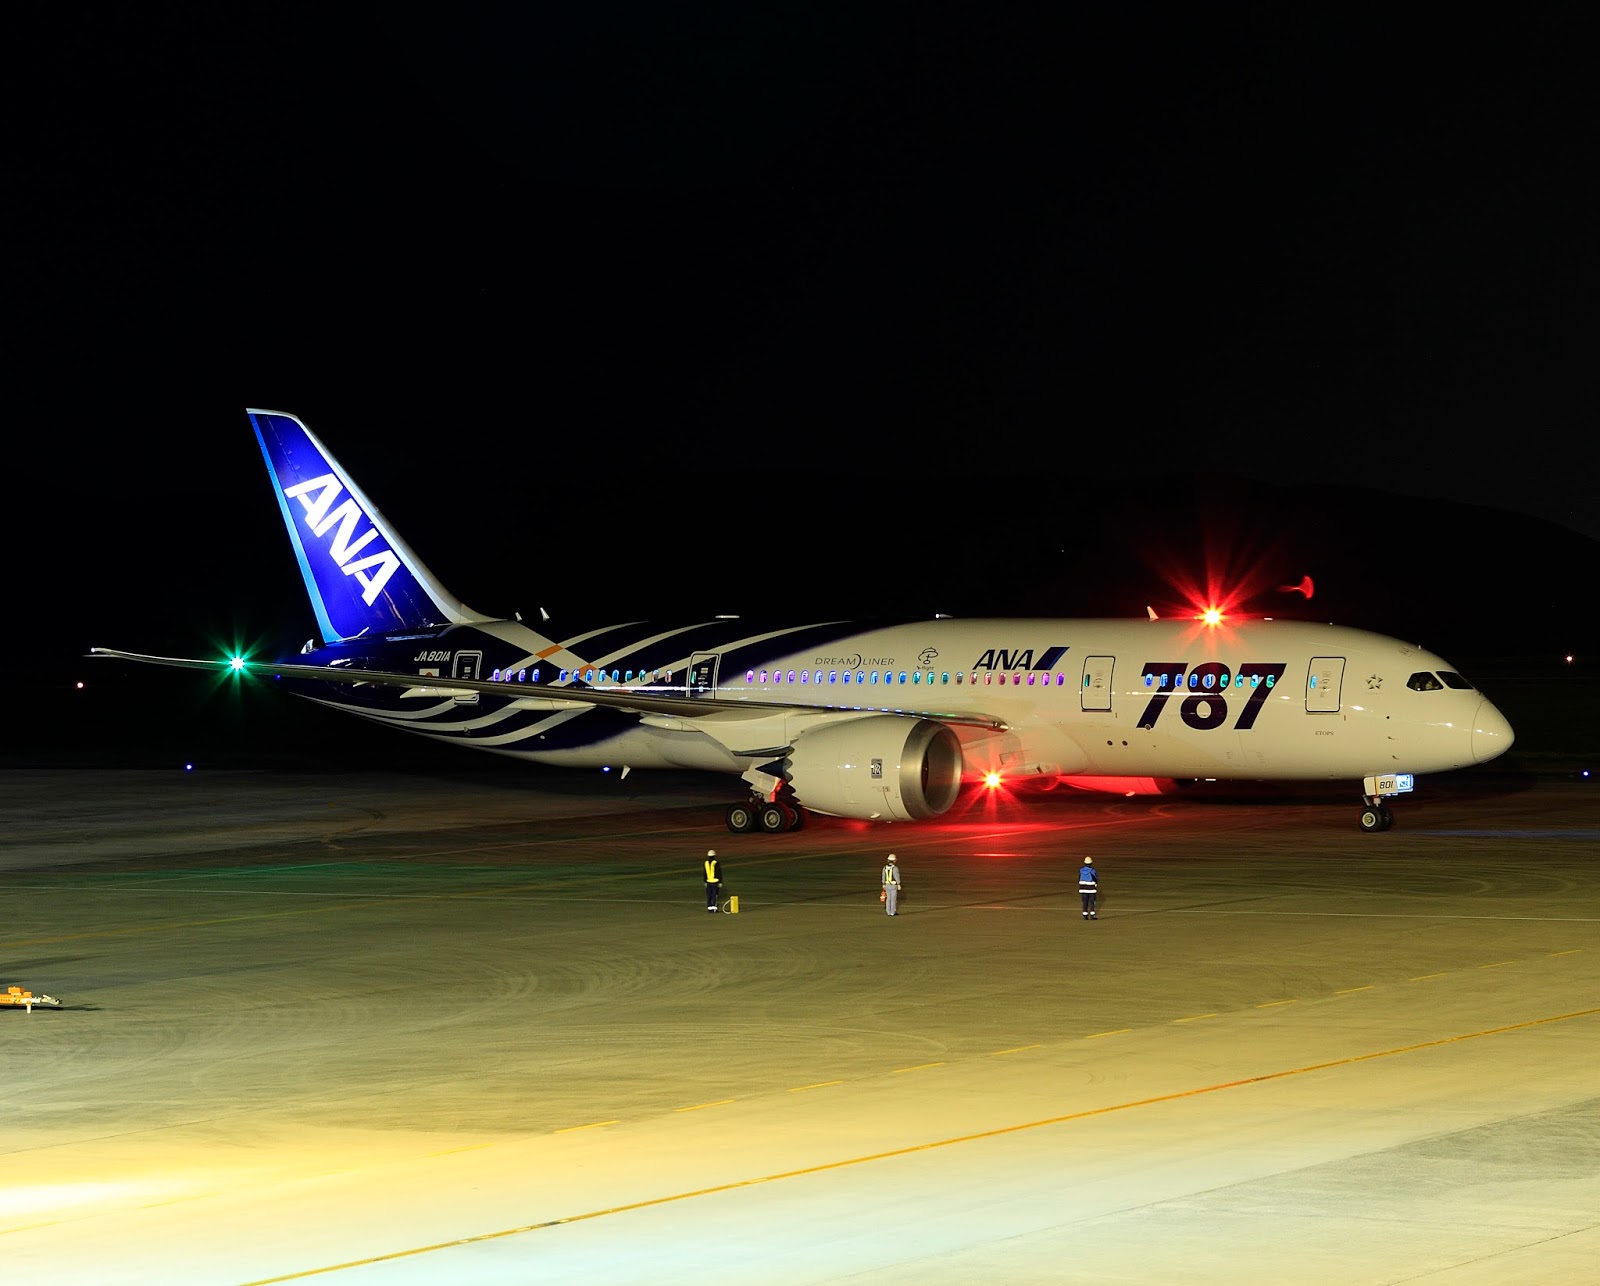 Aircraft Lighting: What Do They Mean? - Aircraft Nerds